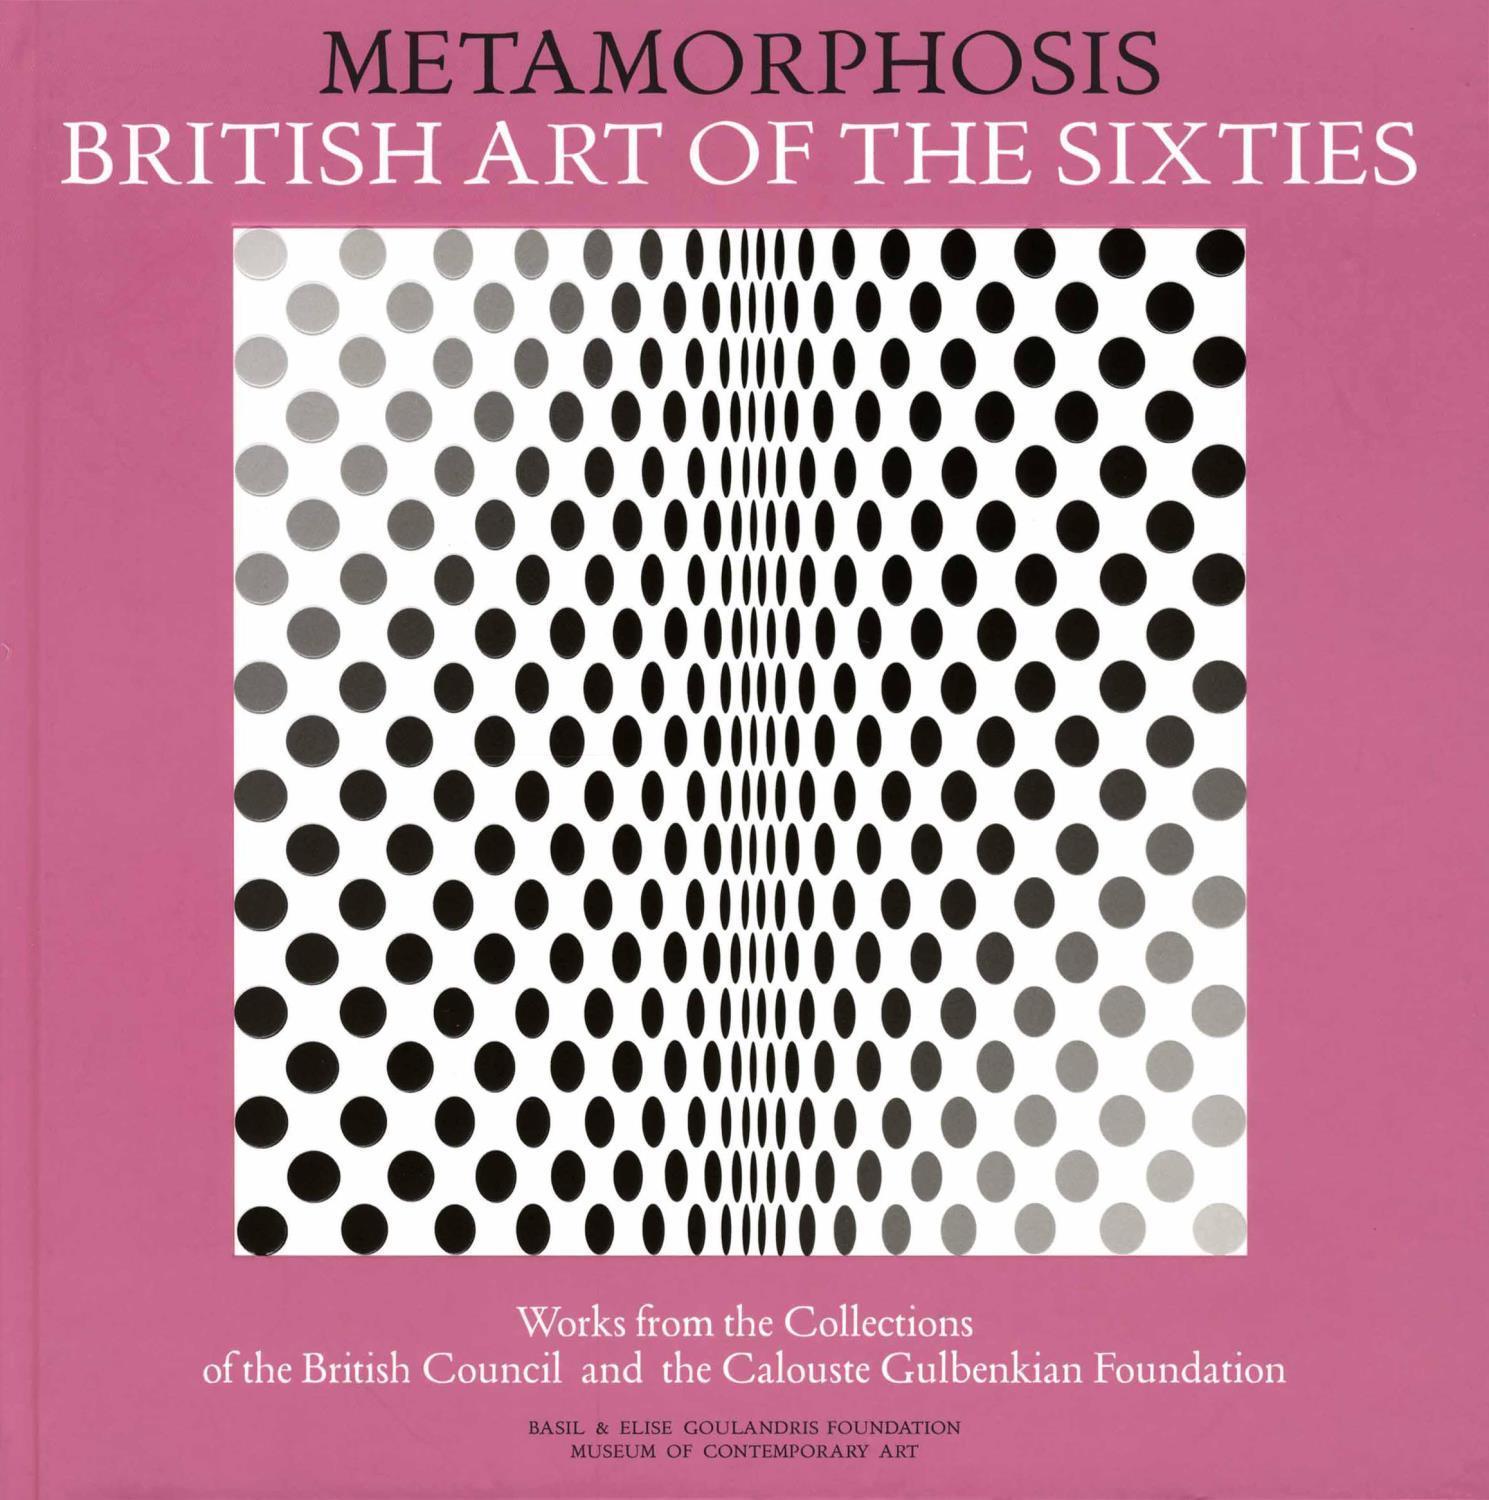 Metamorphosis. British Art of the Sixties. Works from the Collections of the British Council and the Calouste Gulbenkian Foundation